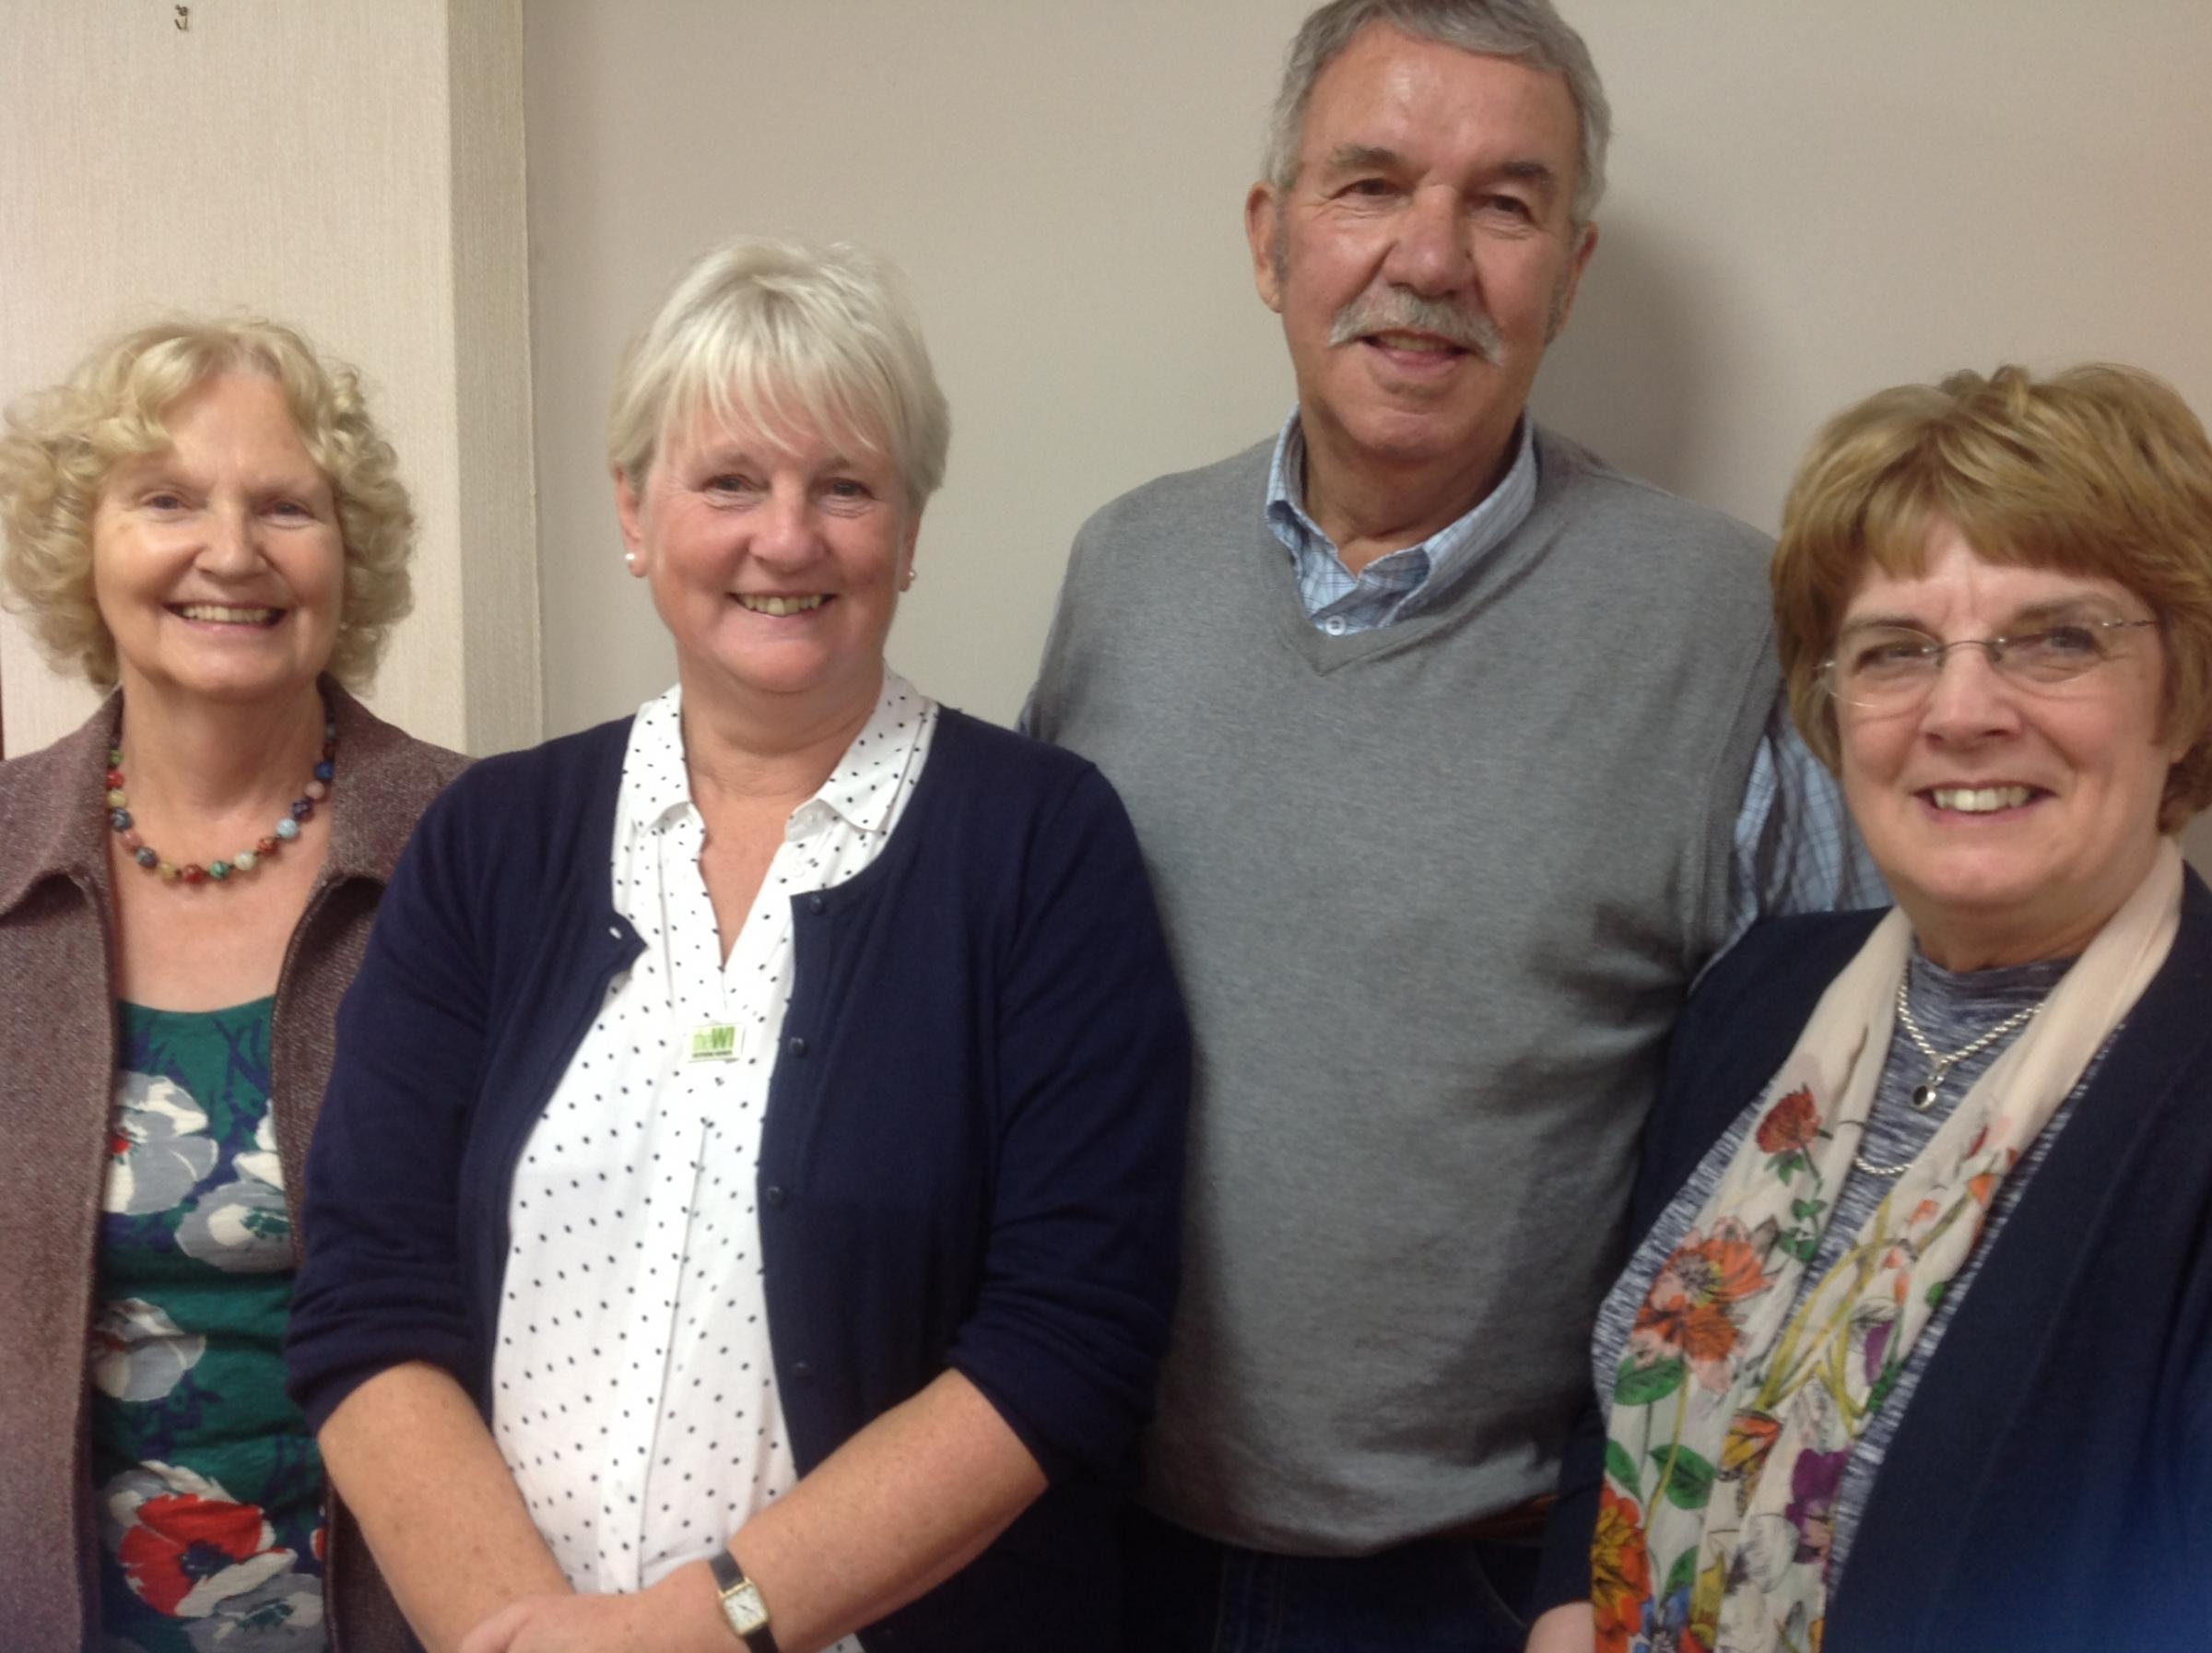 The council released a picture of the councillors involved in the gaffe - from left to right, it shows Daphne Hope, Janet Frank, Eric Hope and Linda Cowling